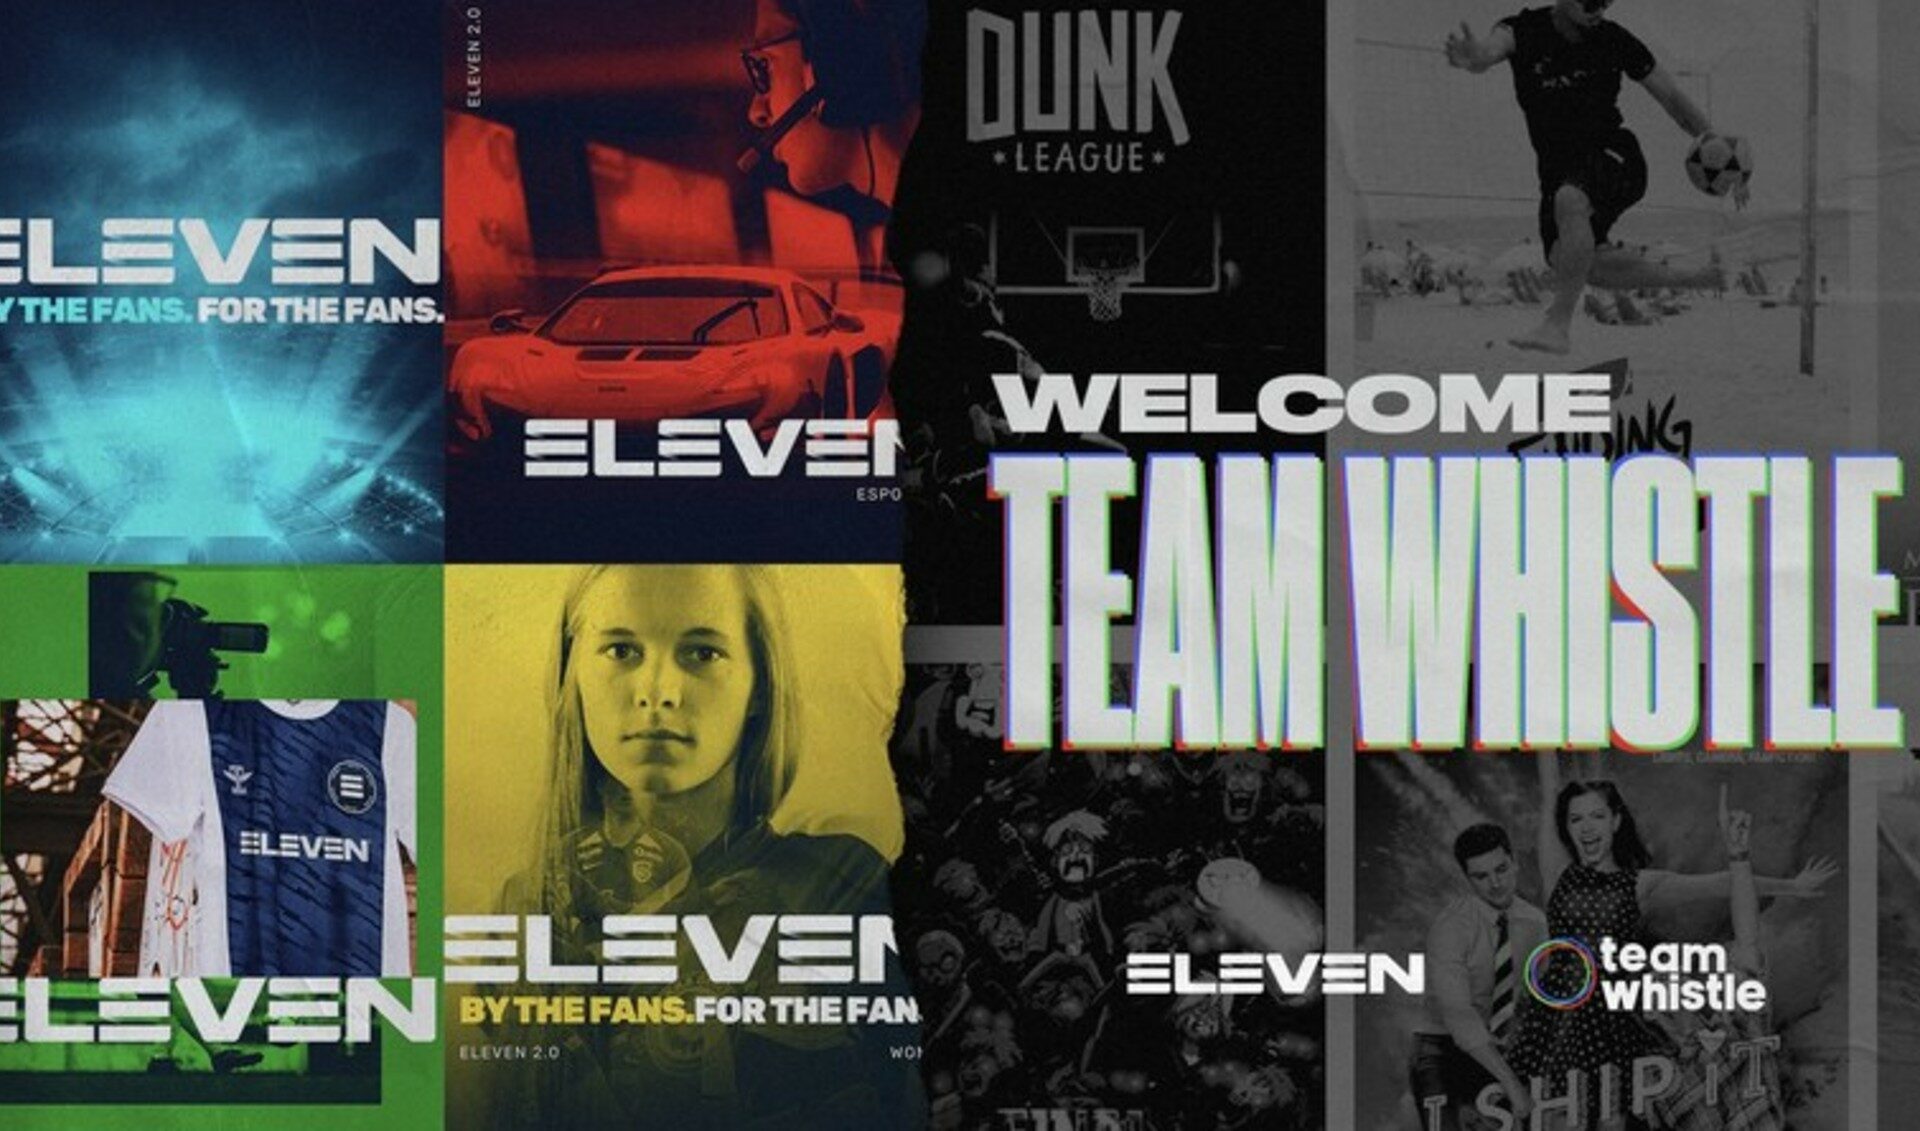 London-Based Eleven Sports Acquires Digital Sports Content Company ‘Team Whistle’